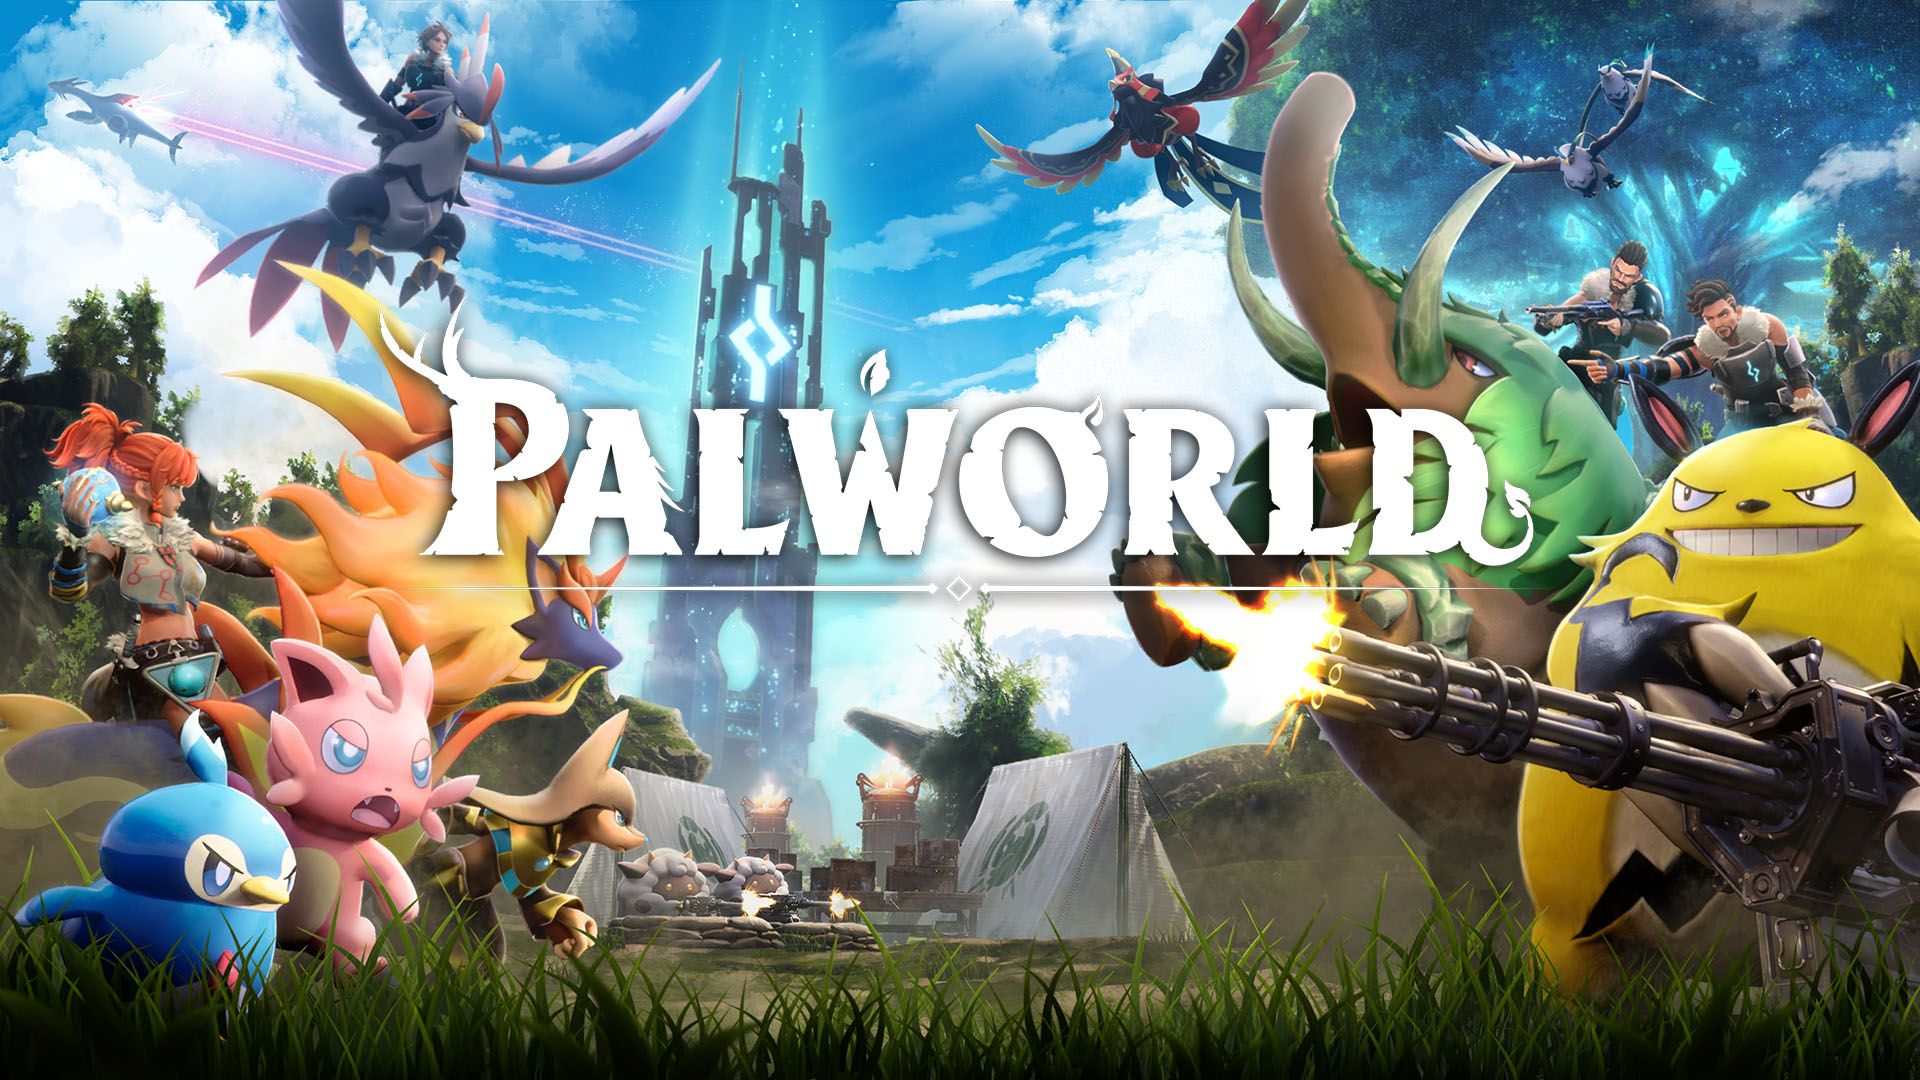 Palworld: Palworld soon for the Switch?